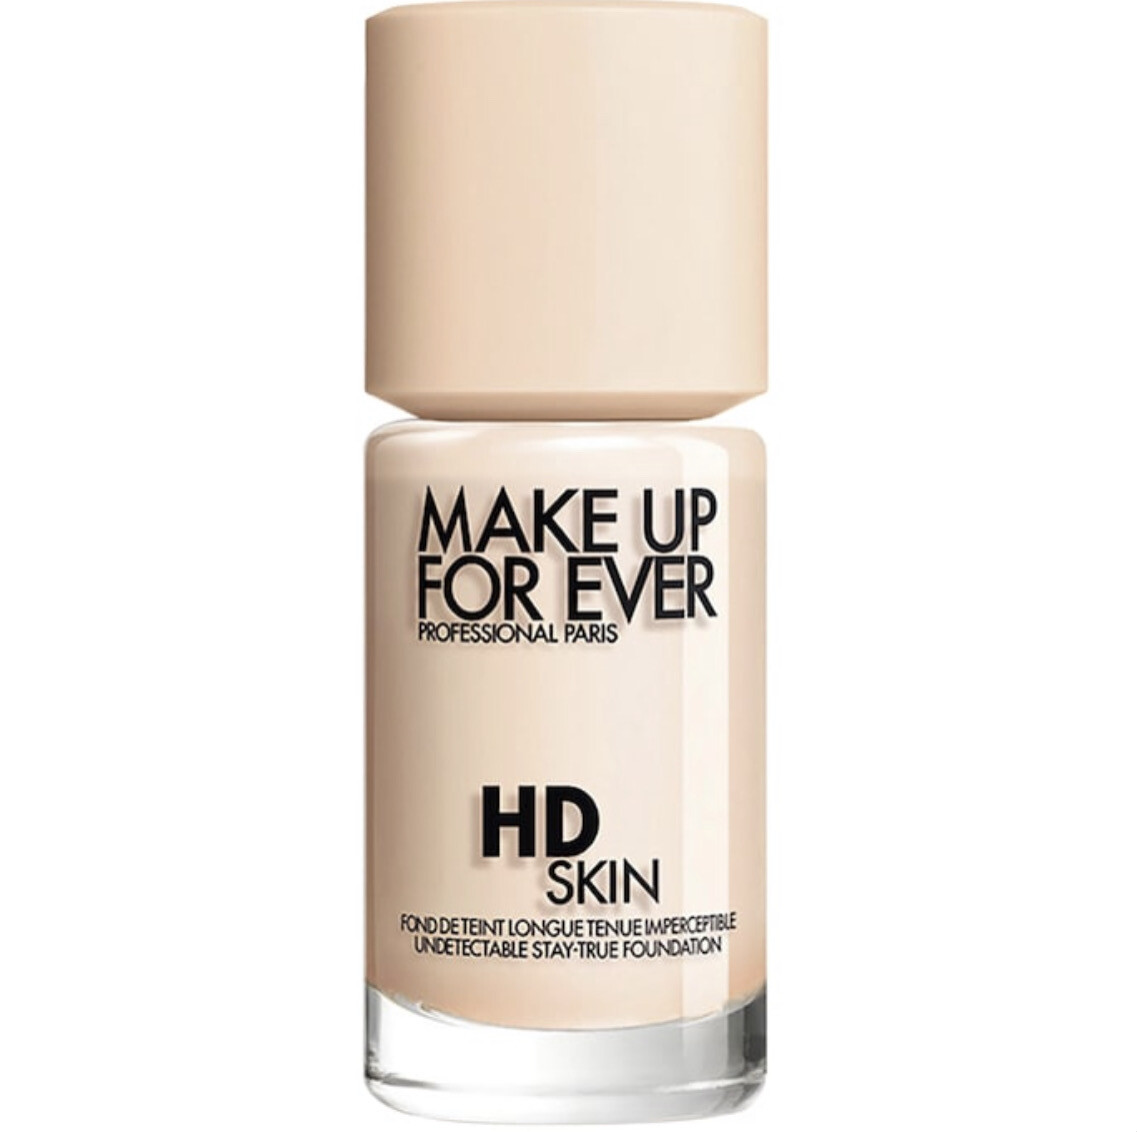 Make Up For Ever - HD Skin Undetectable Longwear Foundation | 1N00 Alabaster - for very fair skin tones with neutral undertones